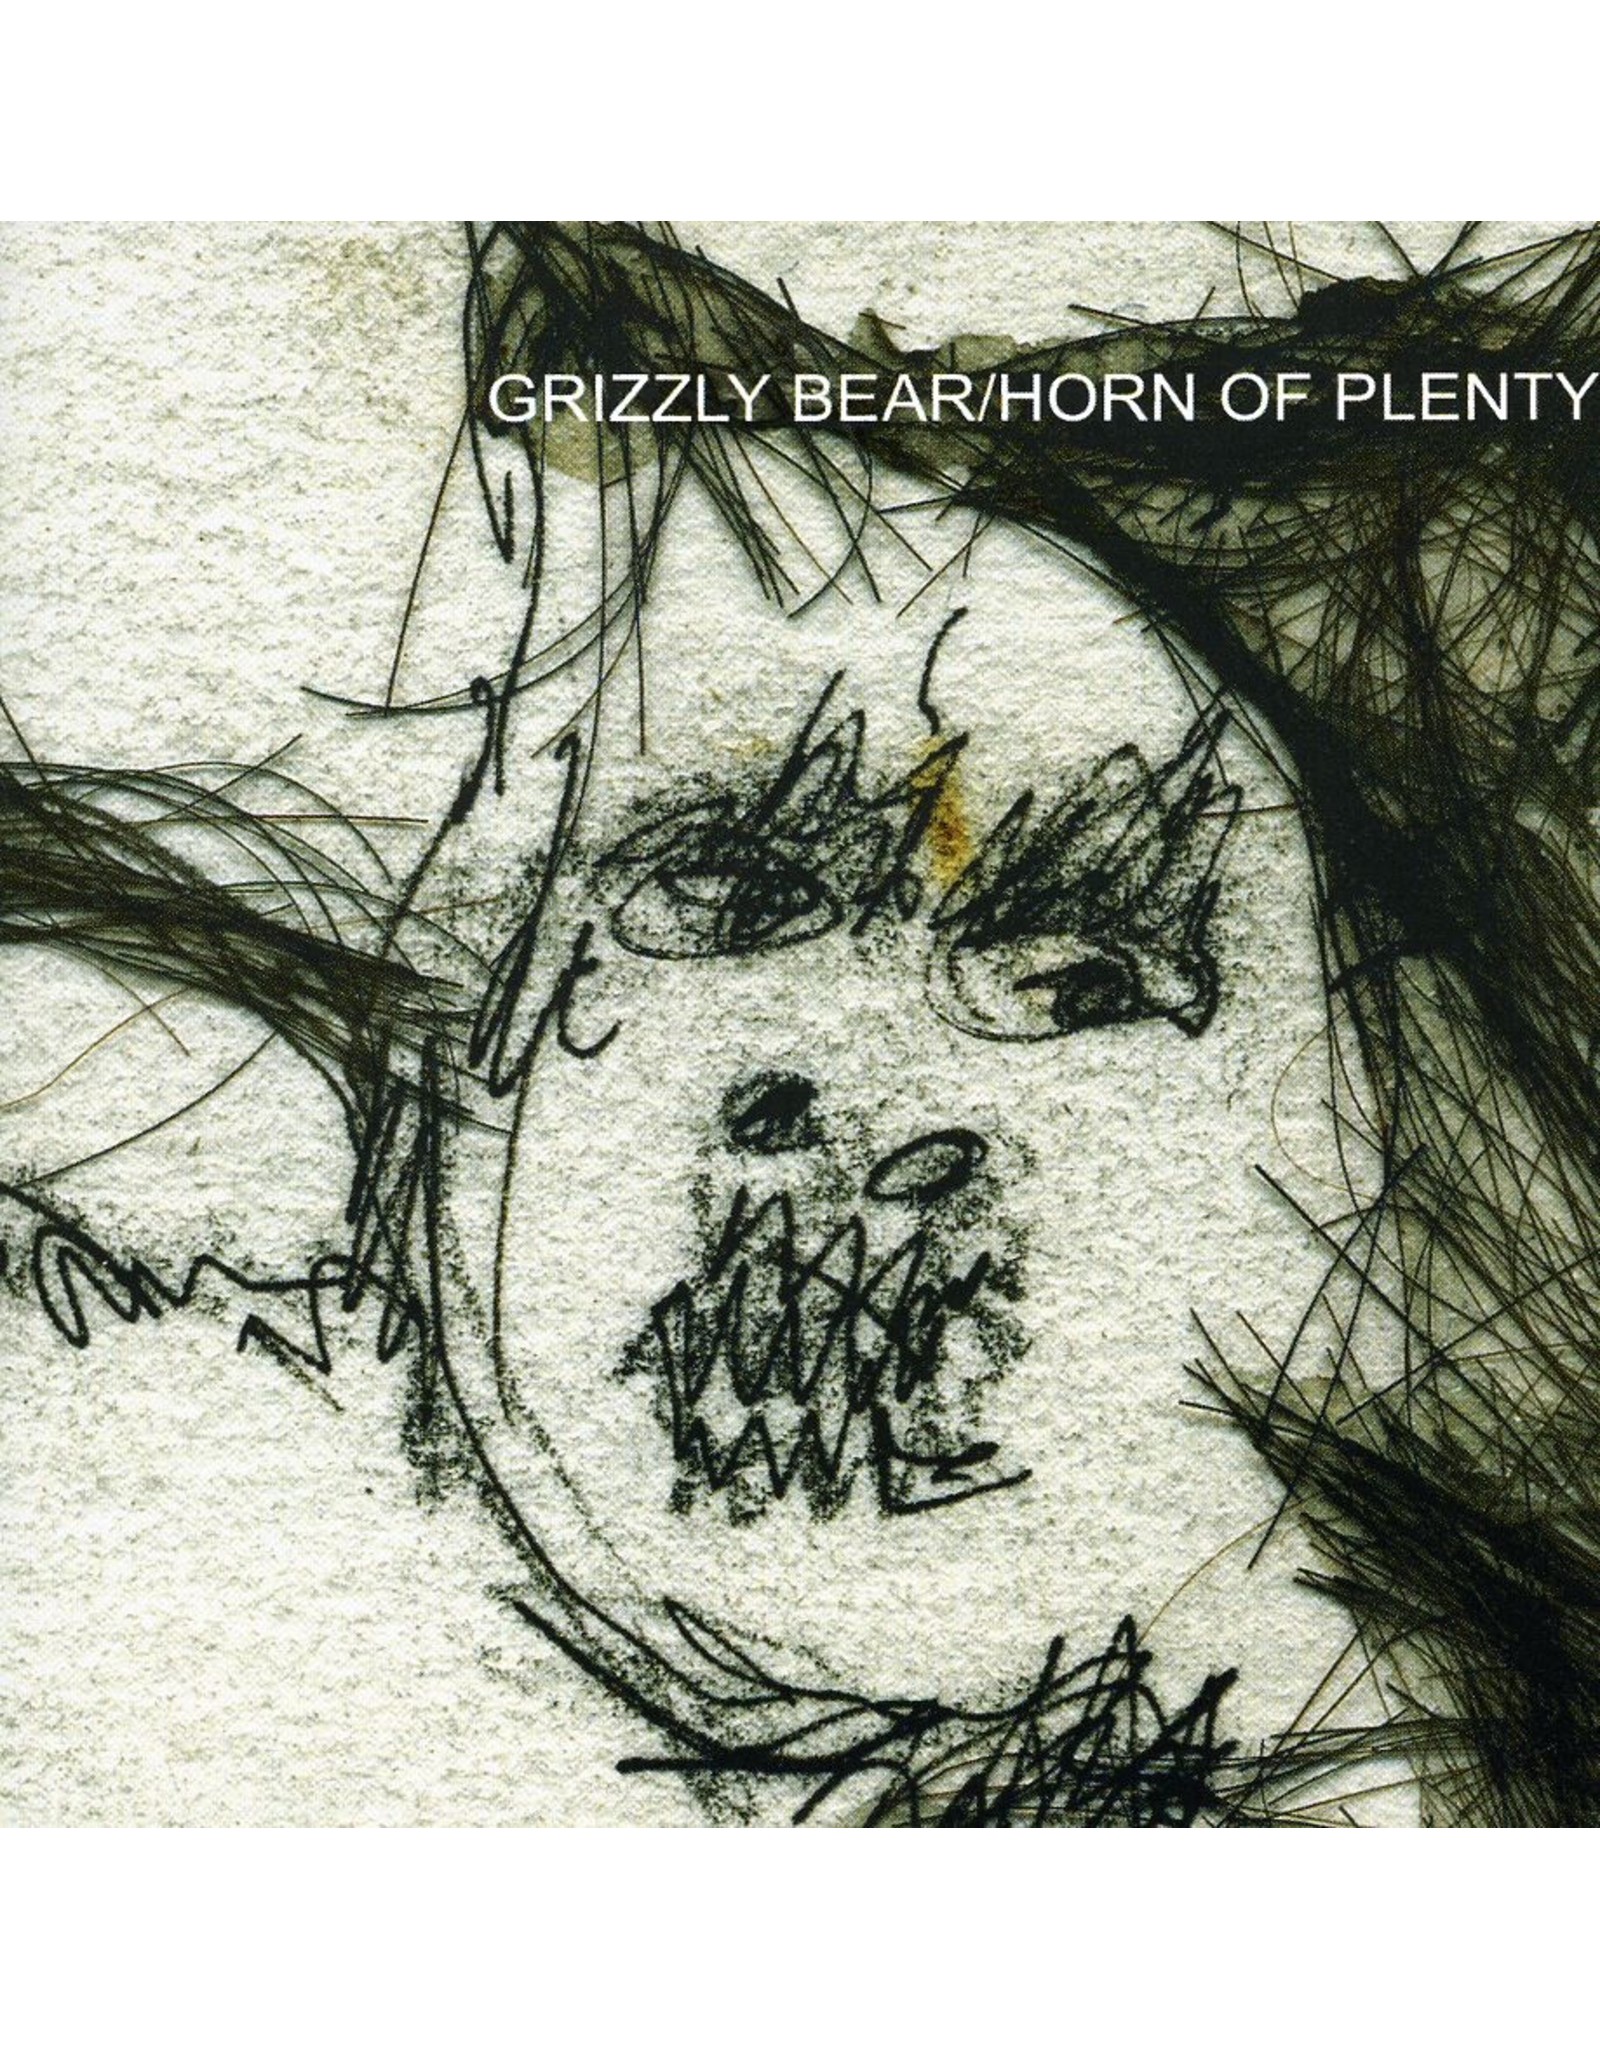 New Vinyl Grizzly Bear - Horn Of Plenty (Colored) LP